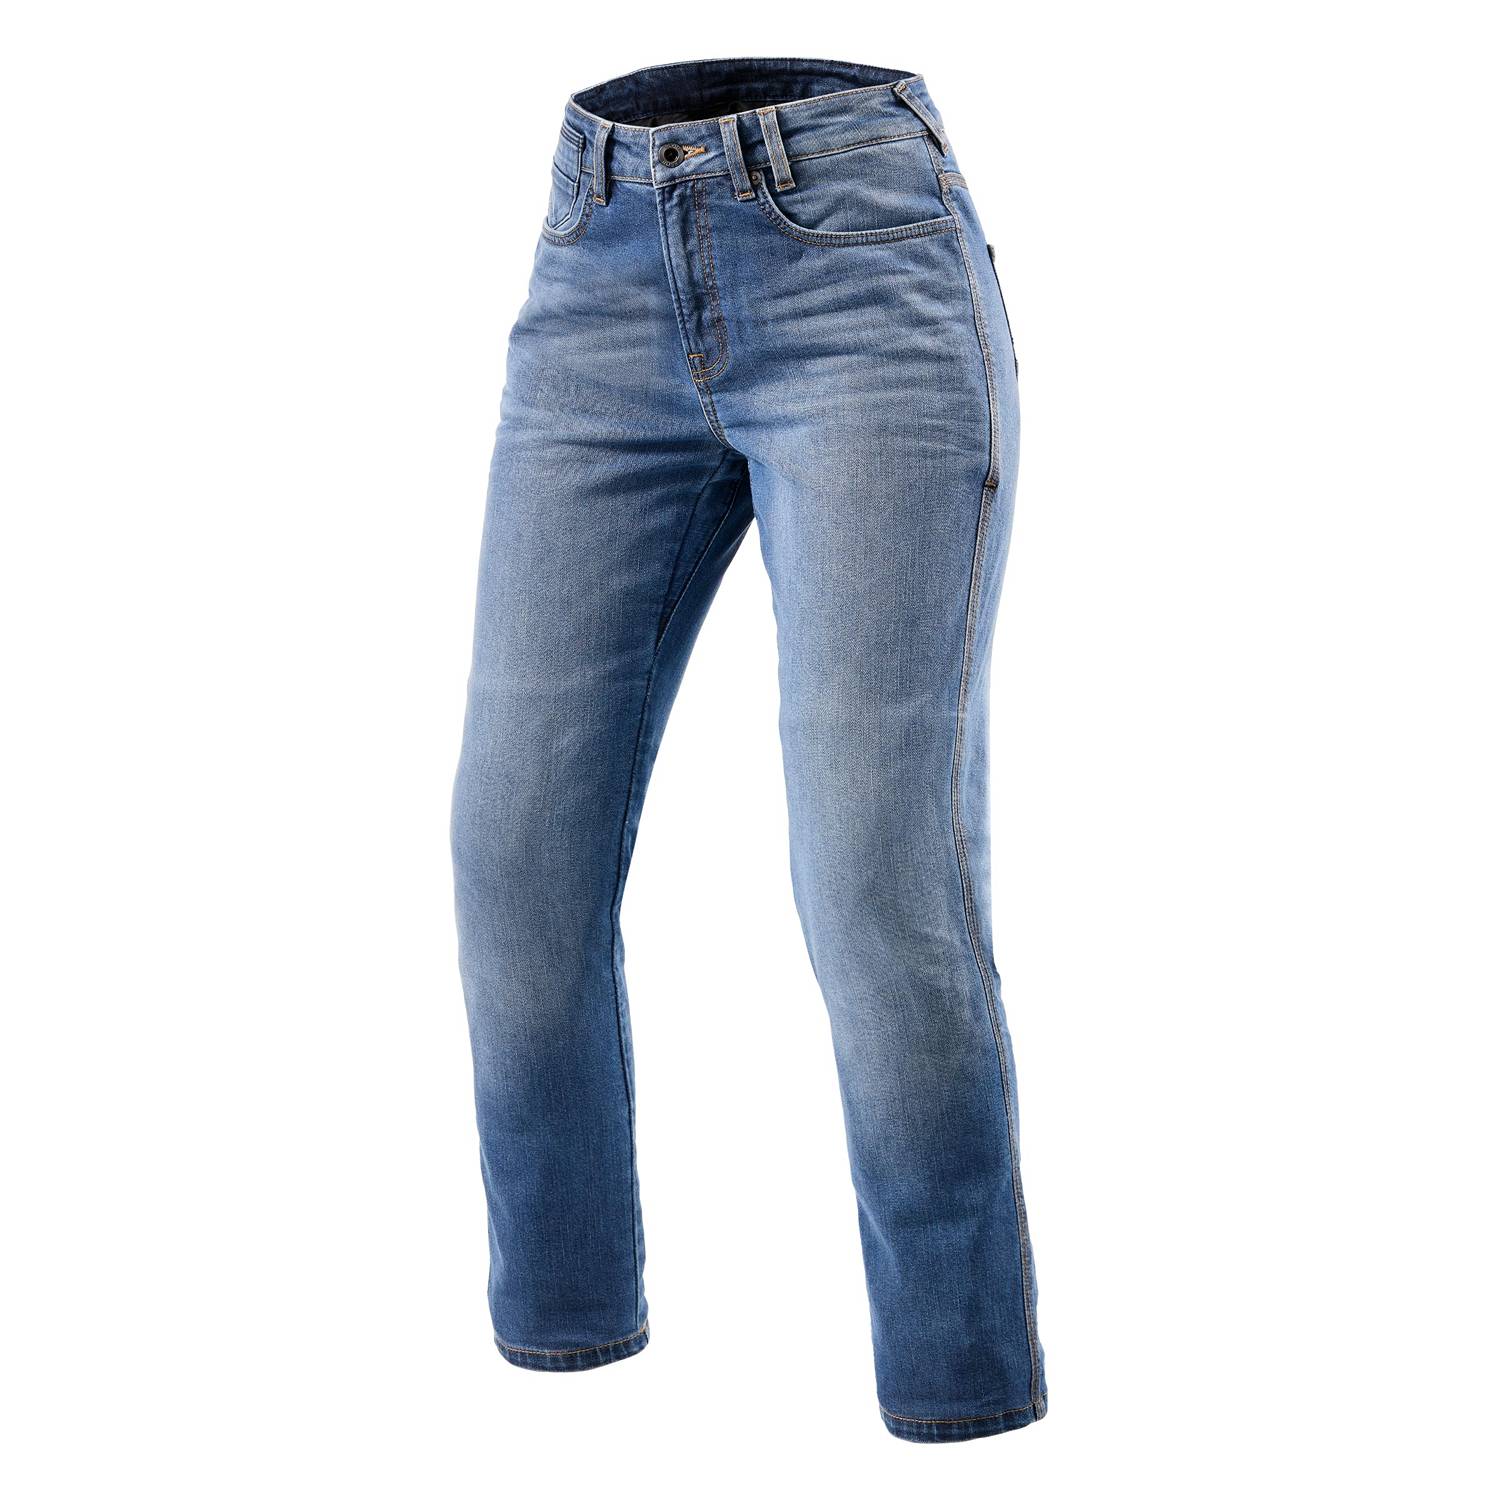 Image of REV'IT! Jeans Victoria 2 Ladies SF Classic Blue Used Motorcycle Jeans Size L32/W28 ID 8700001342827